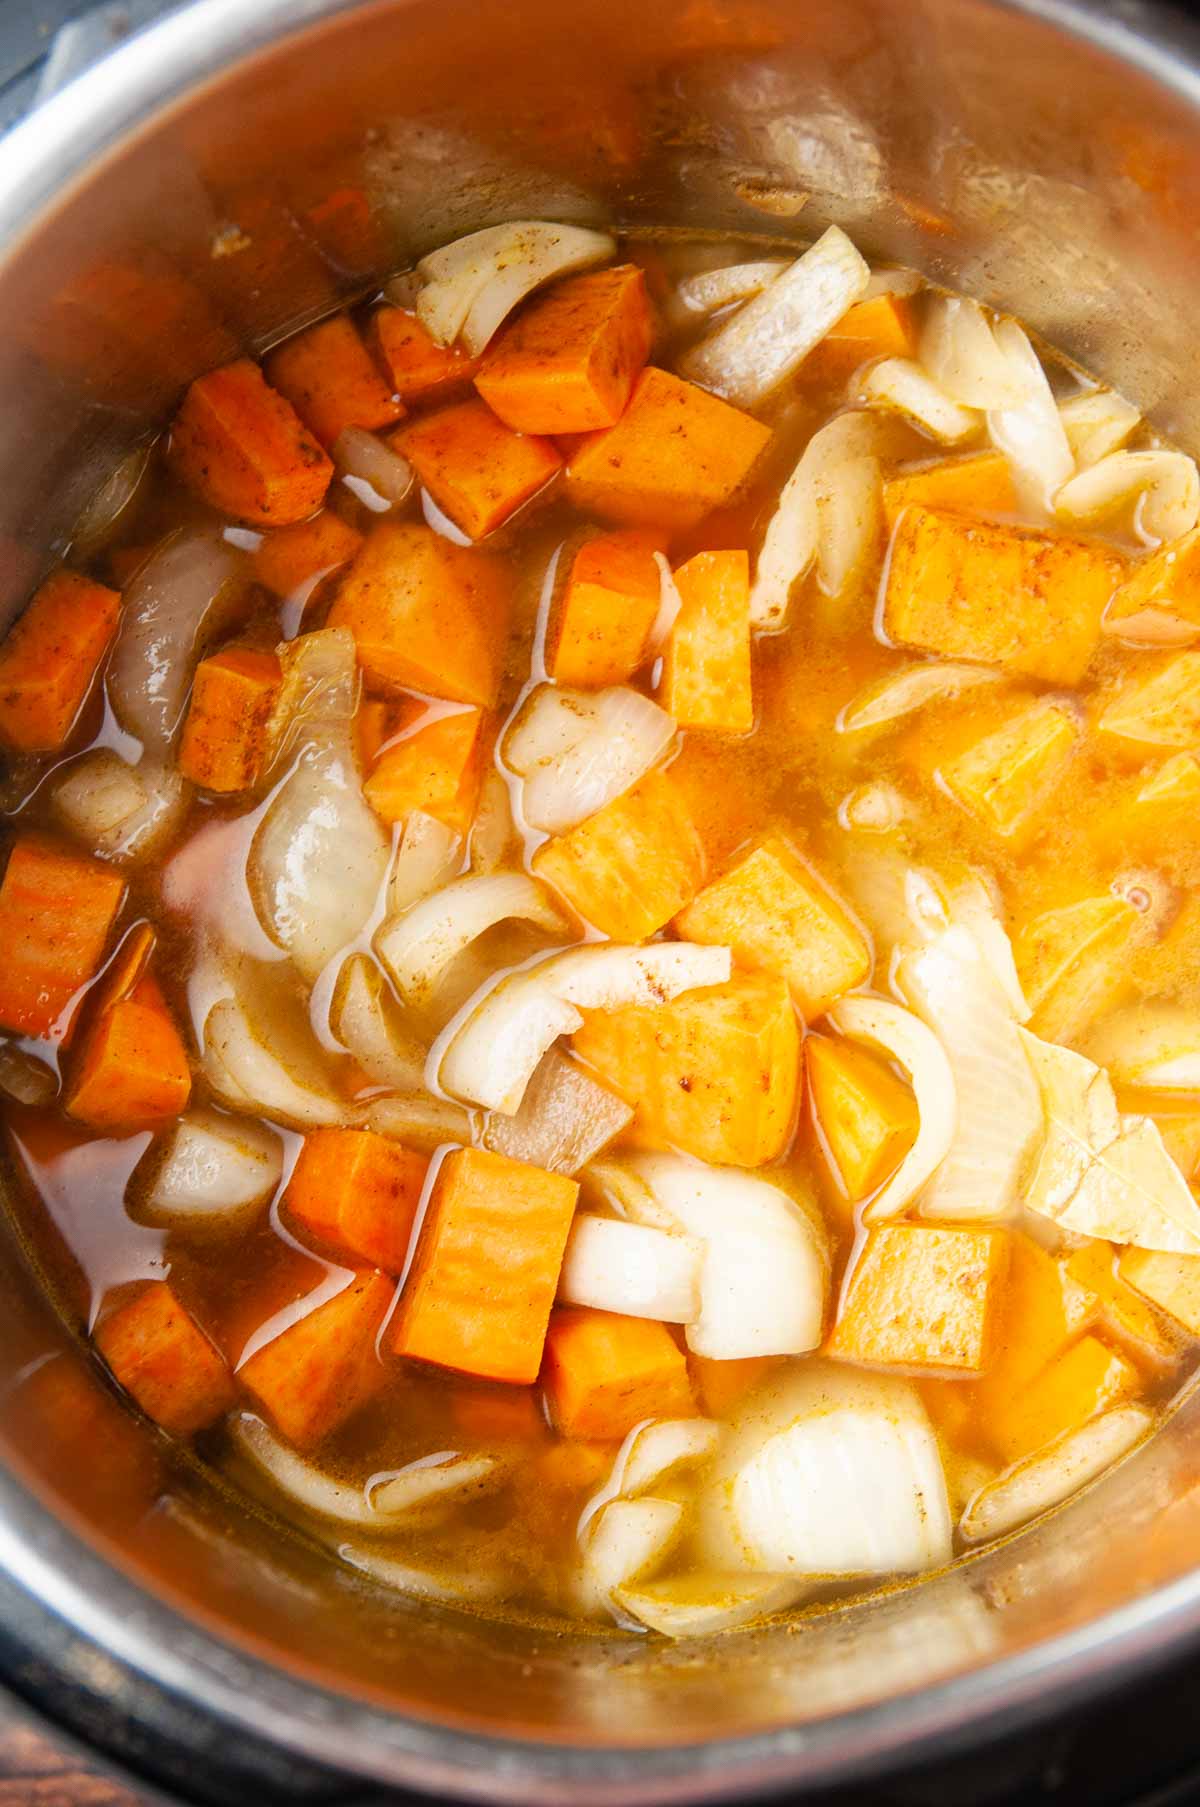 Add the vegetable broth